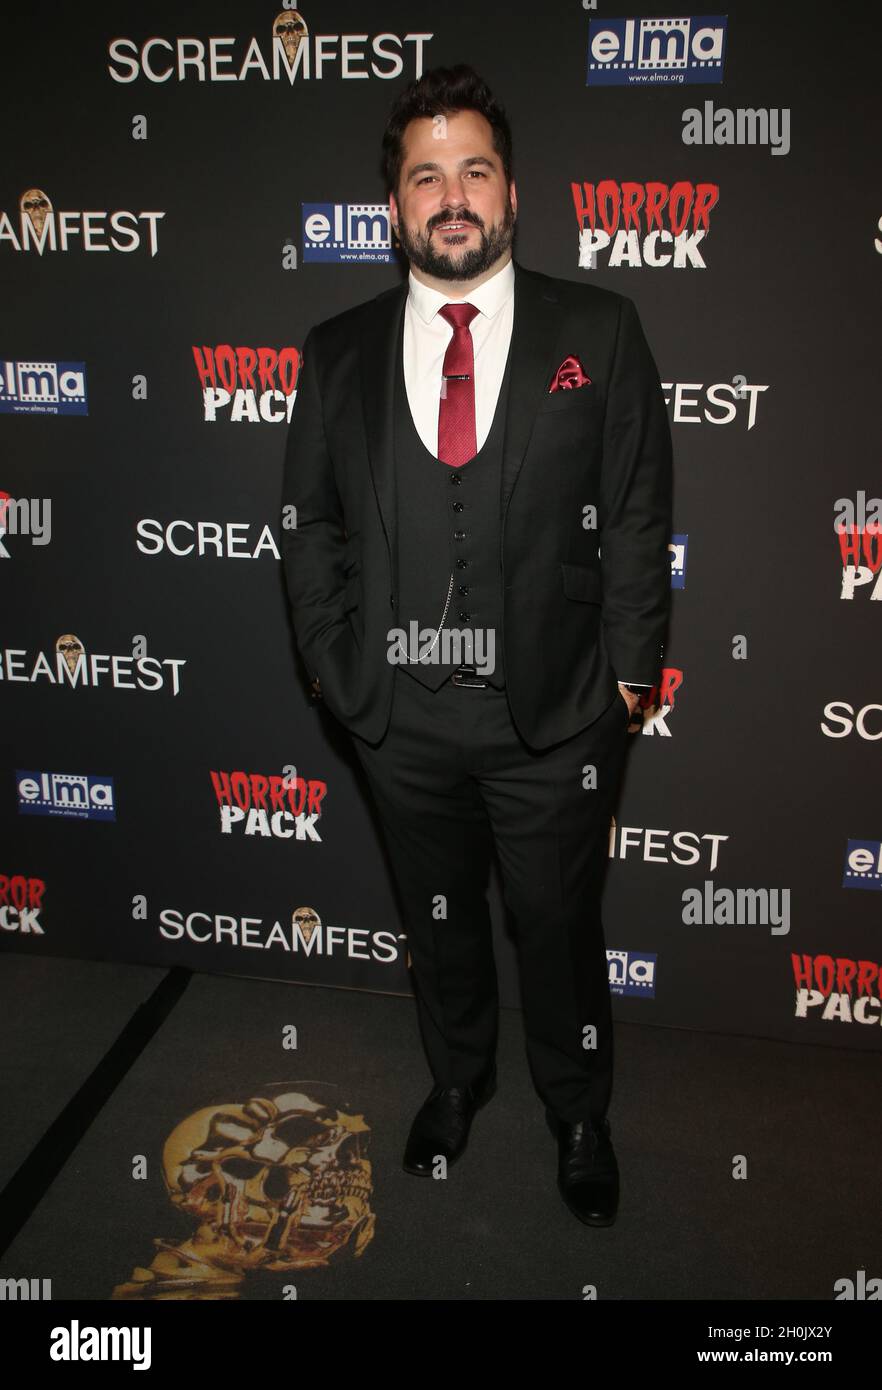 Hollywood, Ca. 12th Oct, 2021. Alex Montilla, at the 21st Screamfest Opening Night Screening Of The Retaliators at Mann Chinese 6 Theatre in Hollywood, California on October 12, 2021. Credit: Faye Sadou/Media Punch/Alamy Live News Stock Photo